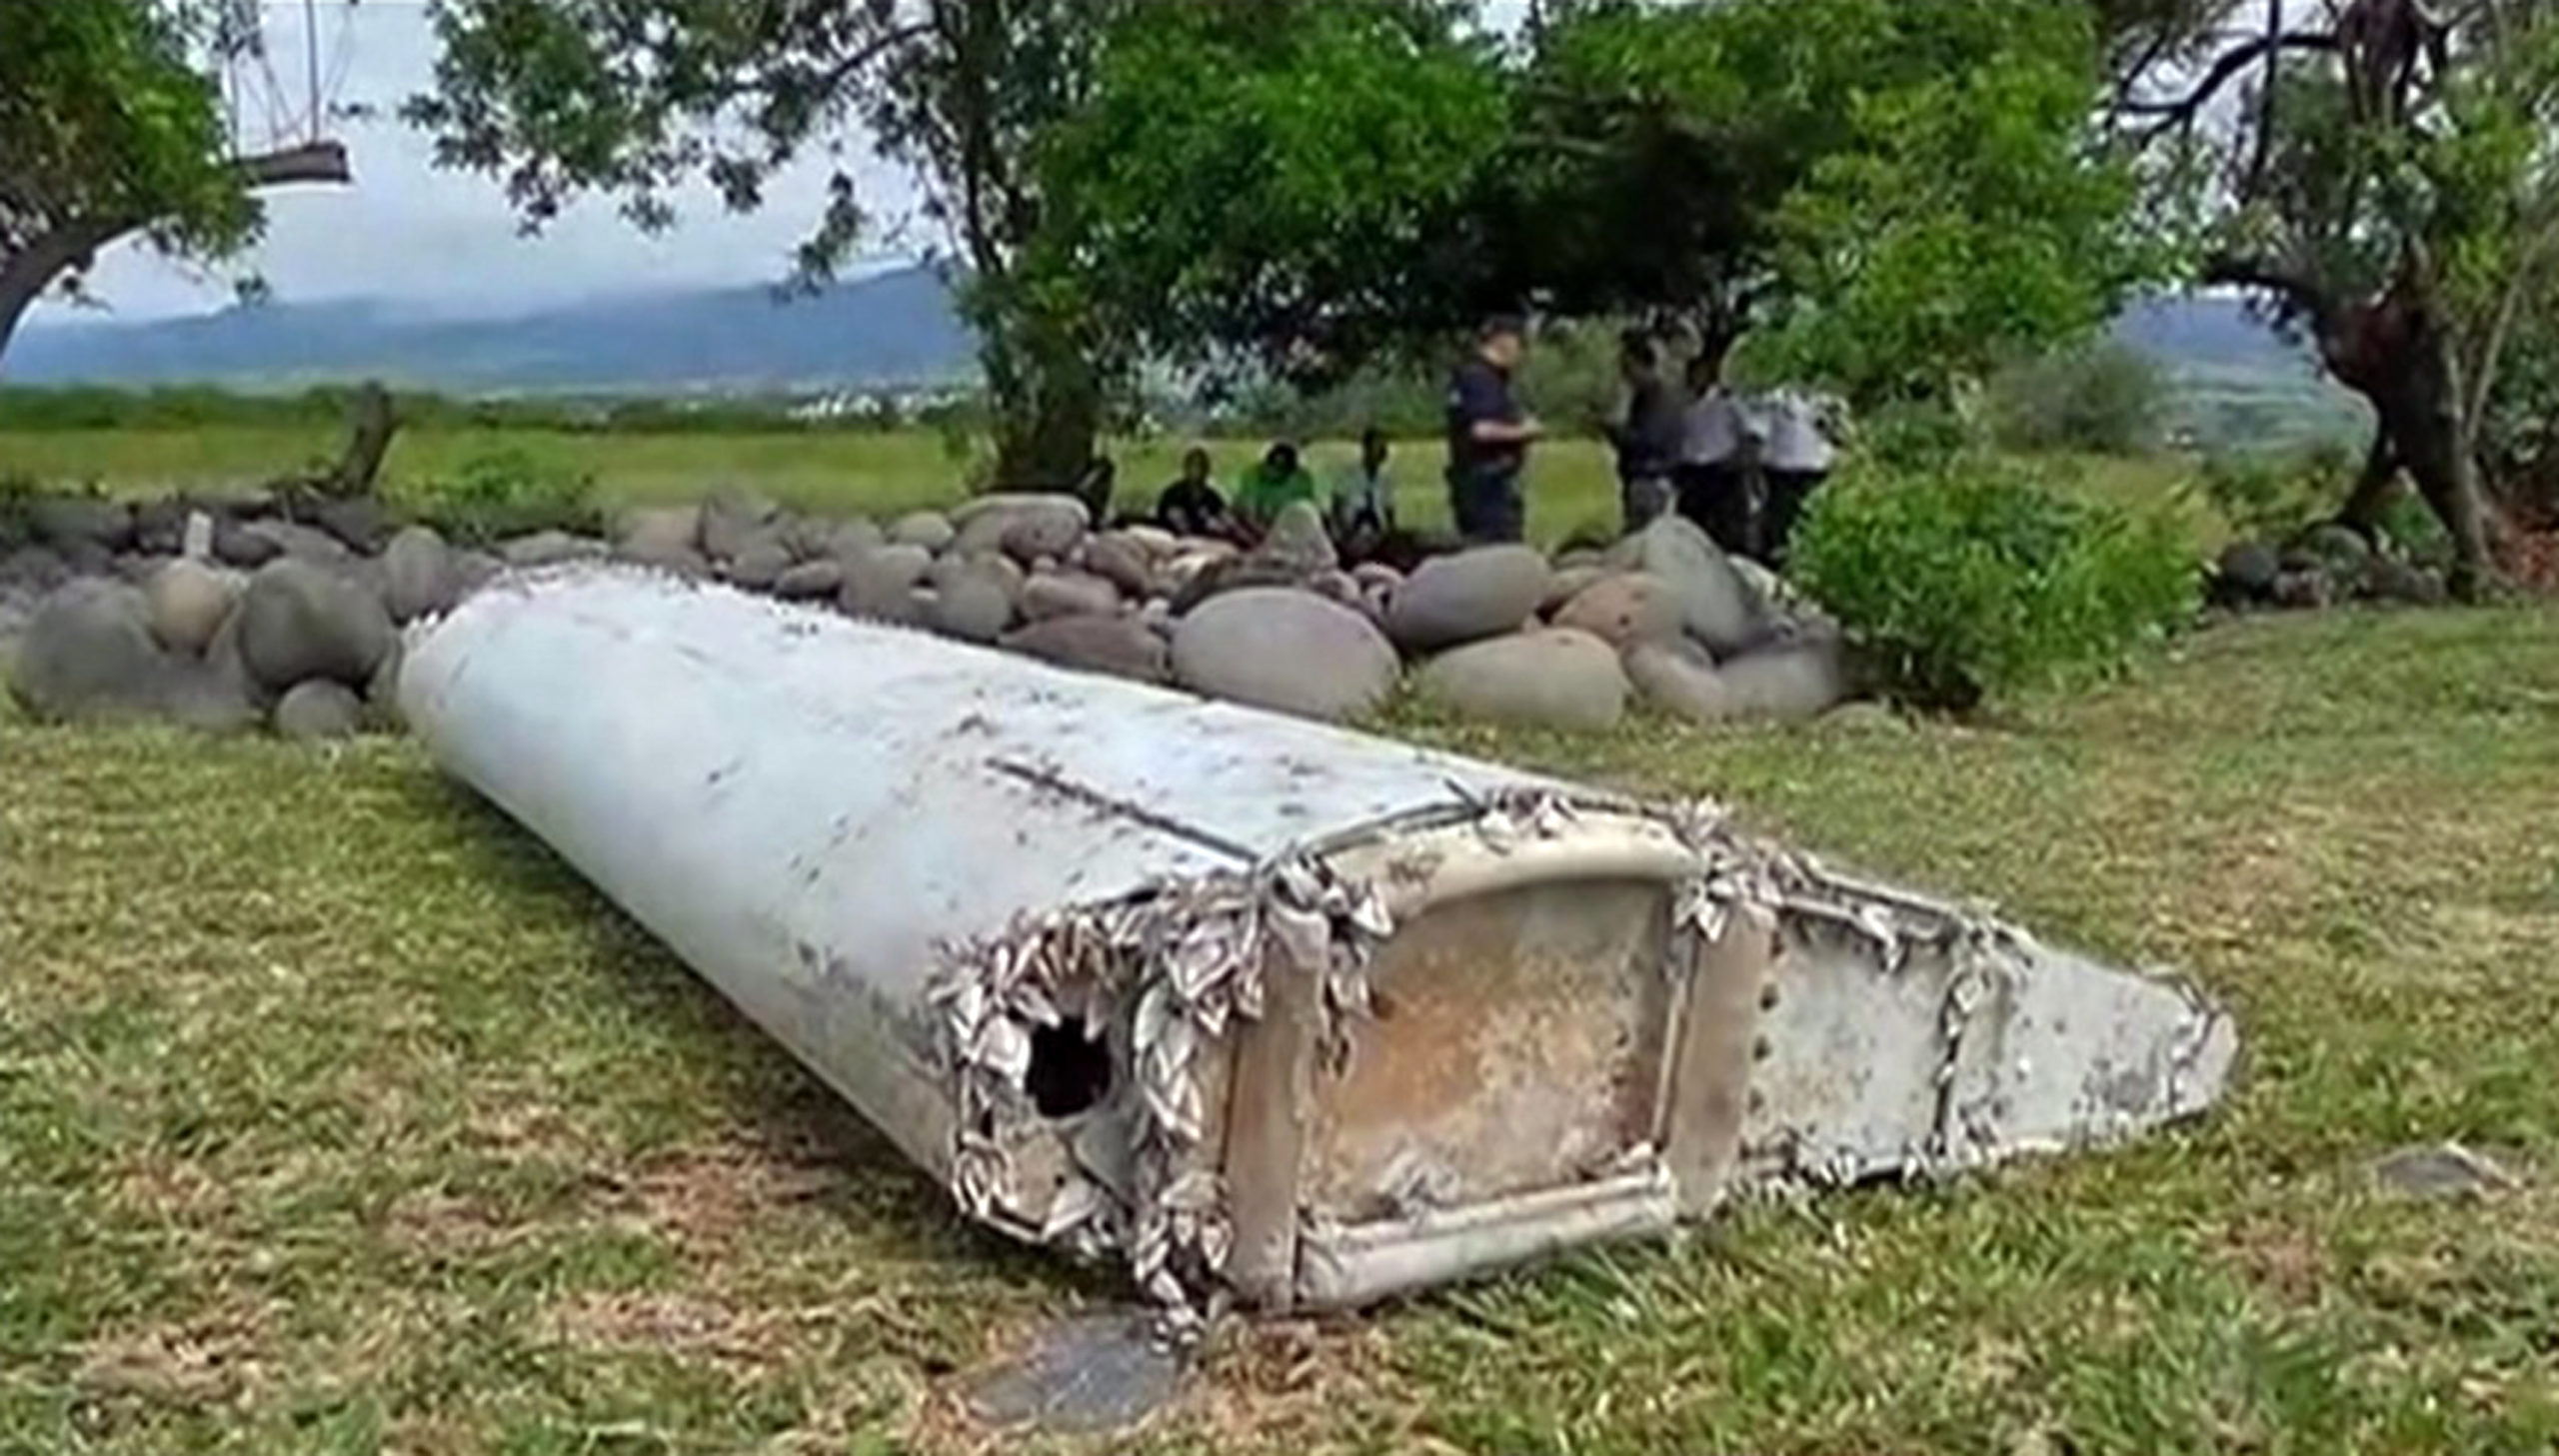 How We Will Find Out If The Discovered Plane Wreckage Is Part Of MH370